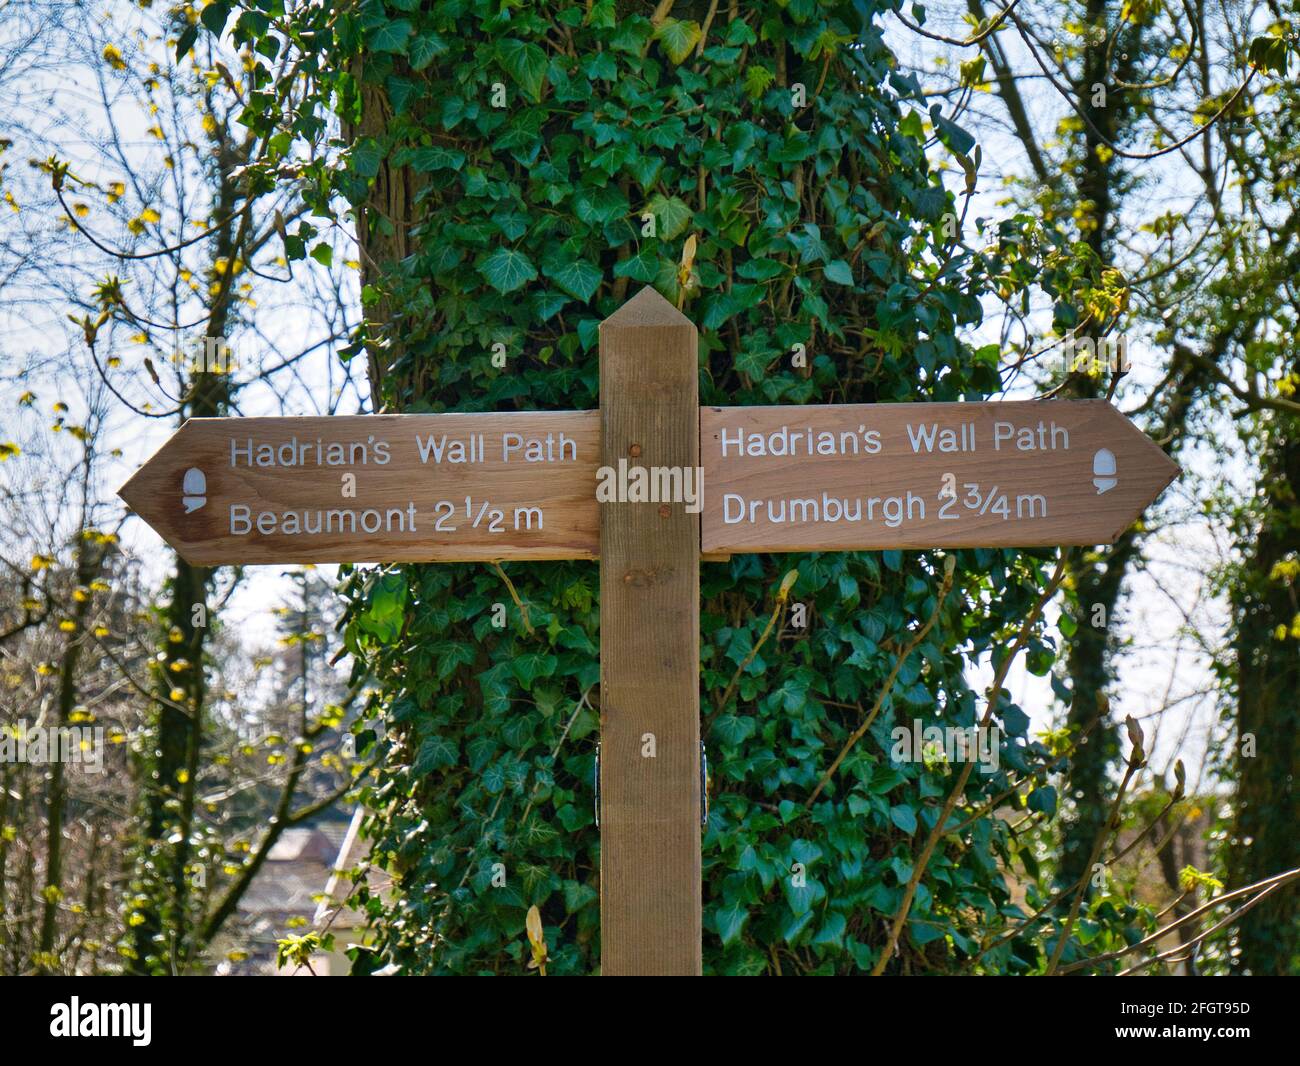 A new wooden sign post in front of an ivy covered tree on the Hadrian's Wall Path between Drumburgh and Beaumont. Stock Photo